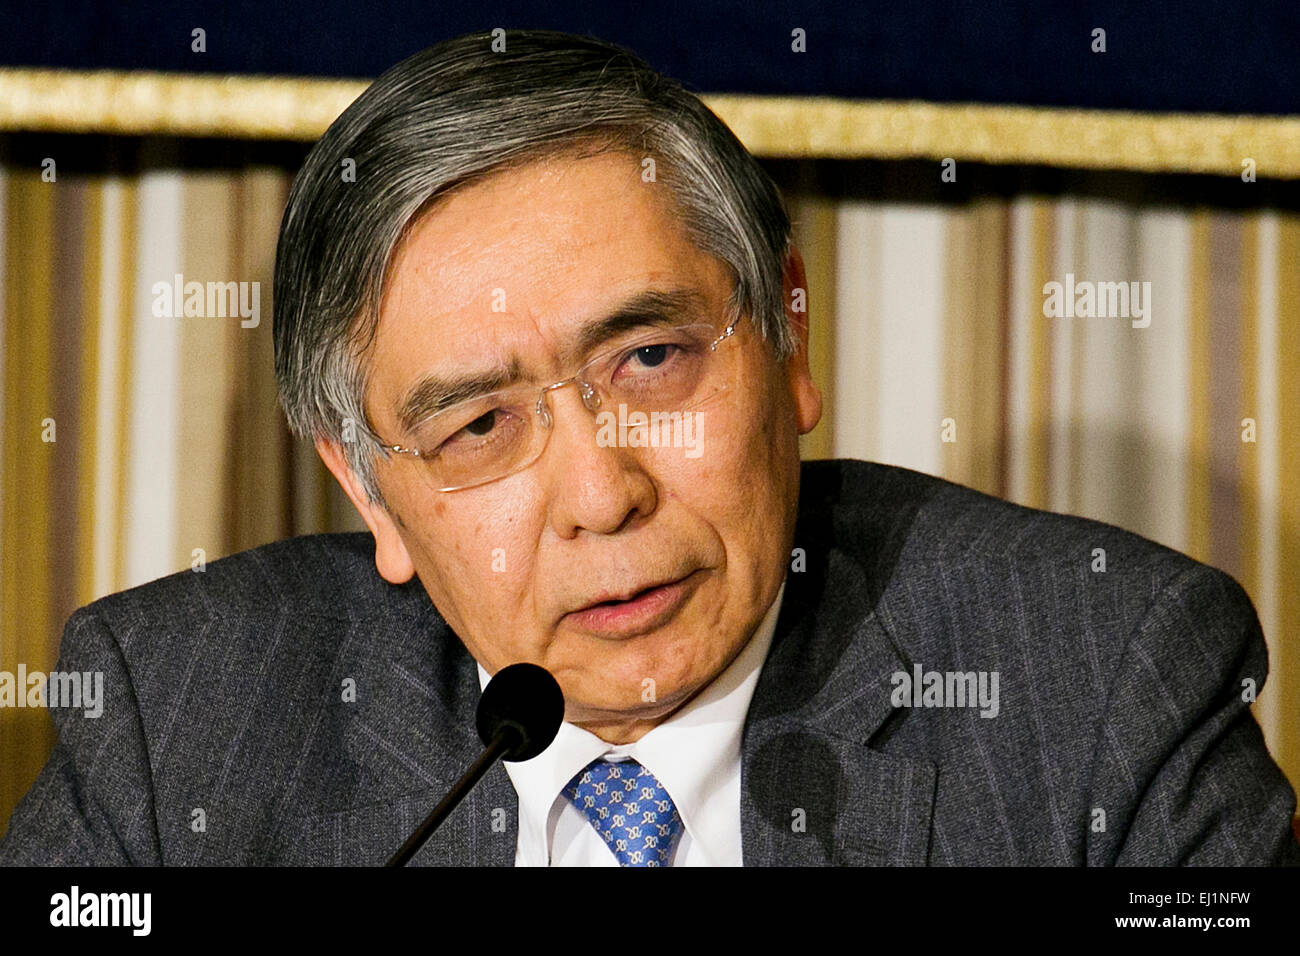 Haruhiko Kuroda, Governor of the Bank of Japan (BOJ) speaks during a press conference at the Foreign Correspondents' Club of Japan on March 20, 2015, Tokyo, Japan. Kuroda spoke about the challenges facing Japan's economy and Bank's policy measures to protect the economy. He also discussed inflation expectations that help to prevent the economy from falling into deflation. The Governor said on Thursday in a parliamentary address that BOJ bond purchases were aimed at hitting the 2 percent inflation target, and not at bankrolling public debt. Credit:  Rodrigo Reyes Marin/AFLO/Alamy Live News Stock Photo